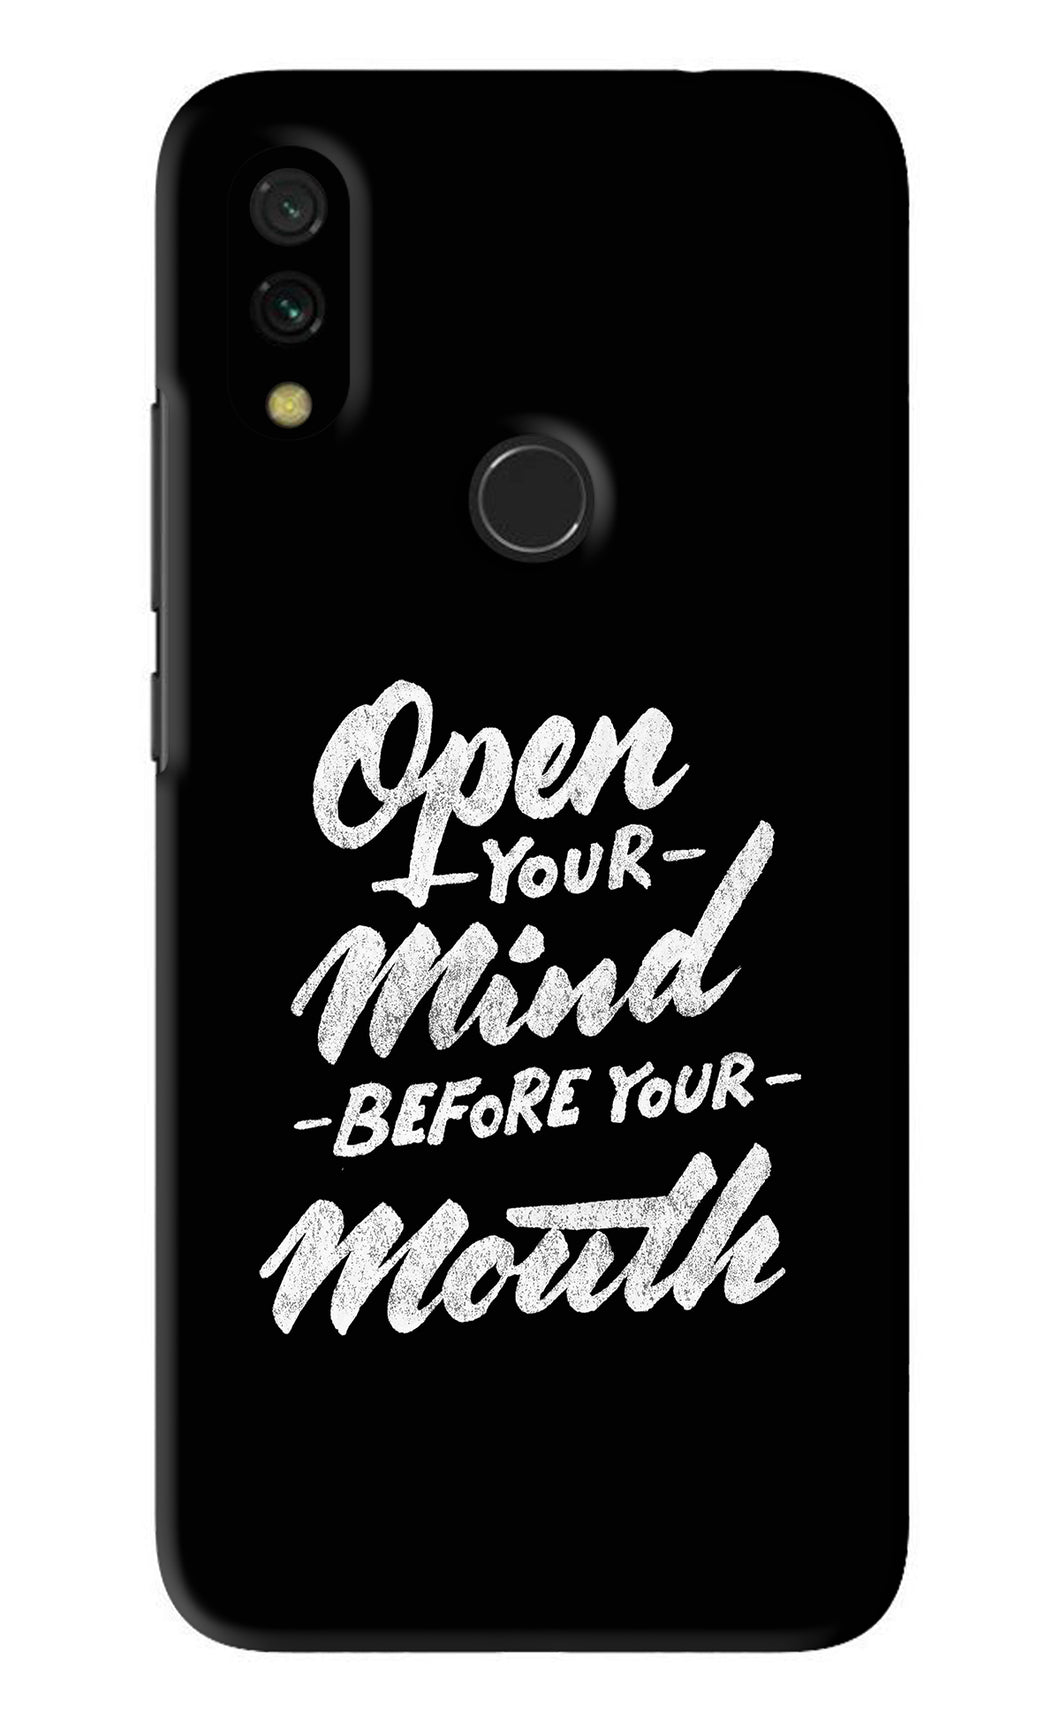 Open Your Mind Before Your Mouth Xiaomi Redmi 7 Back Skin Wrap